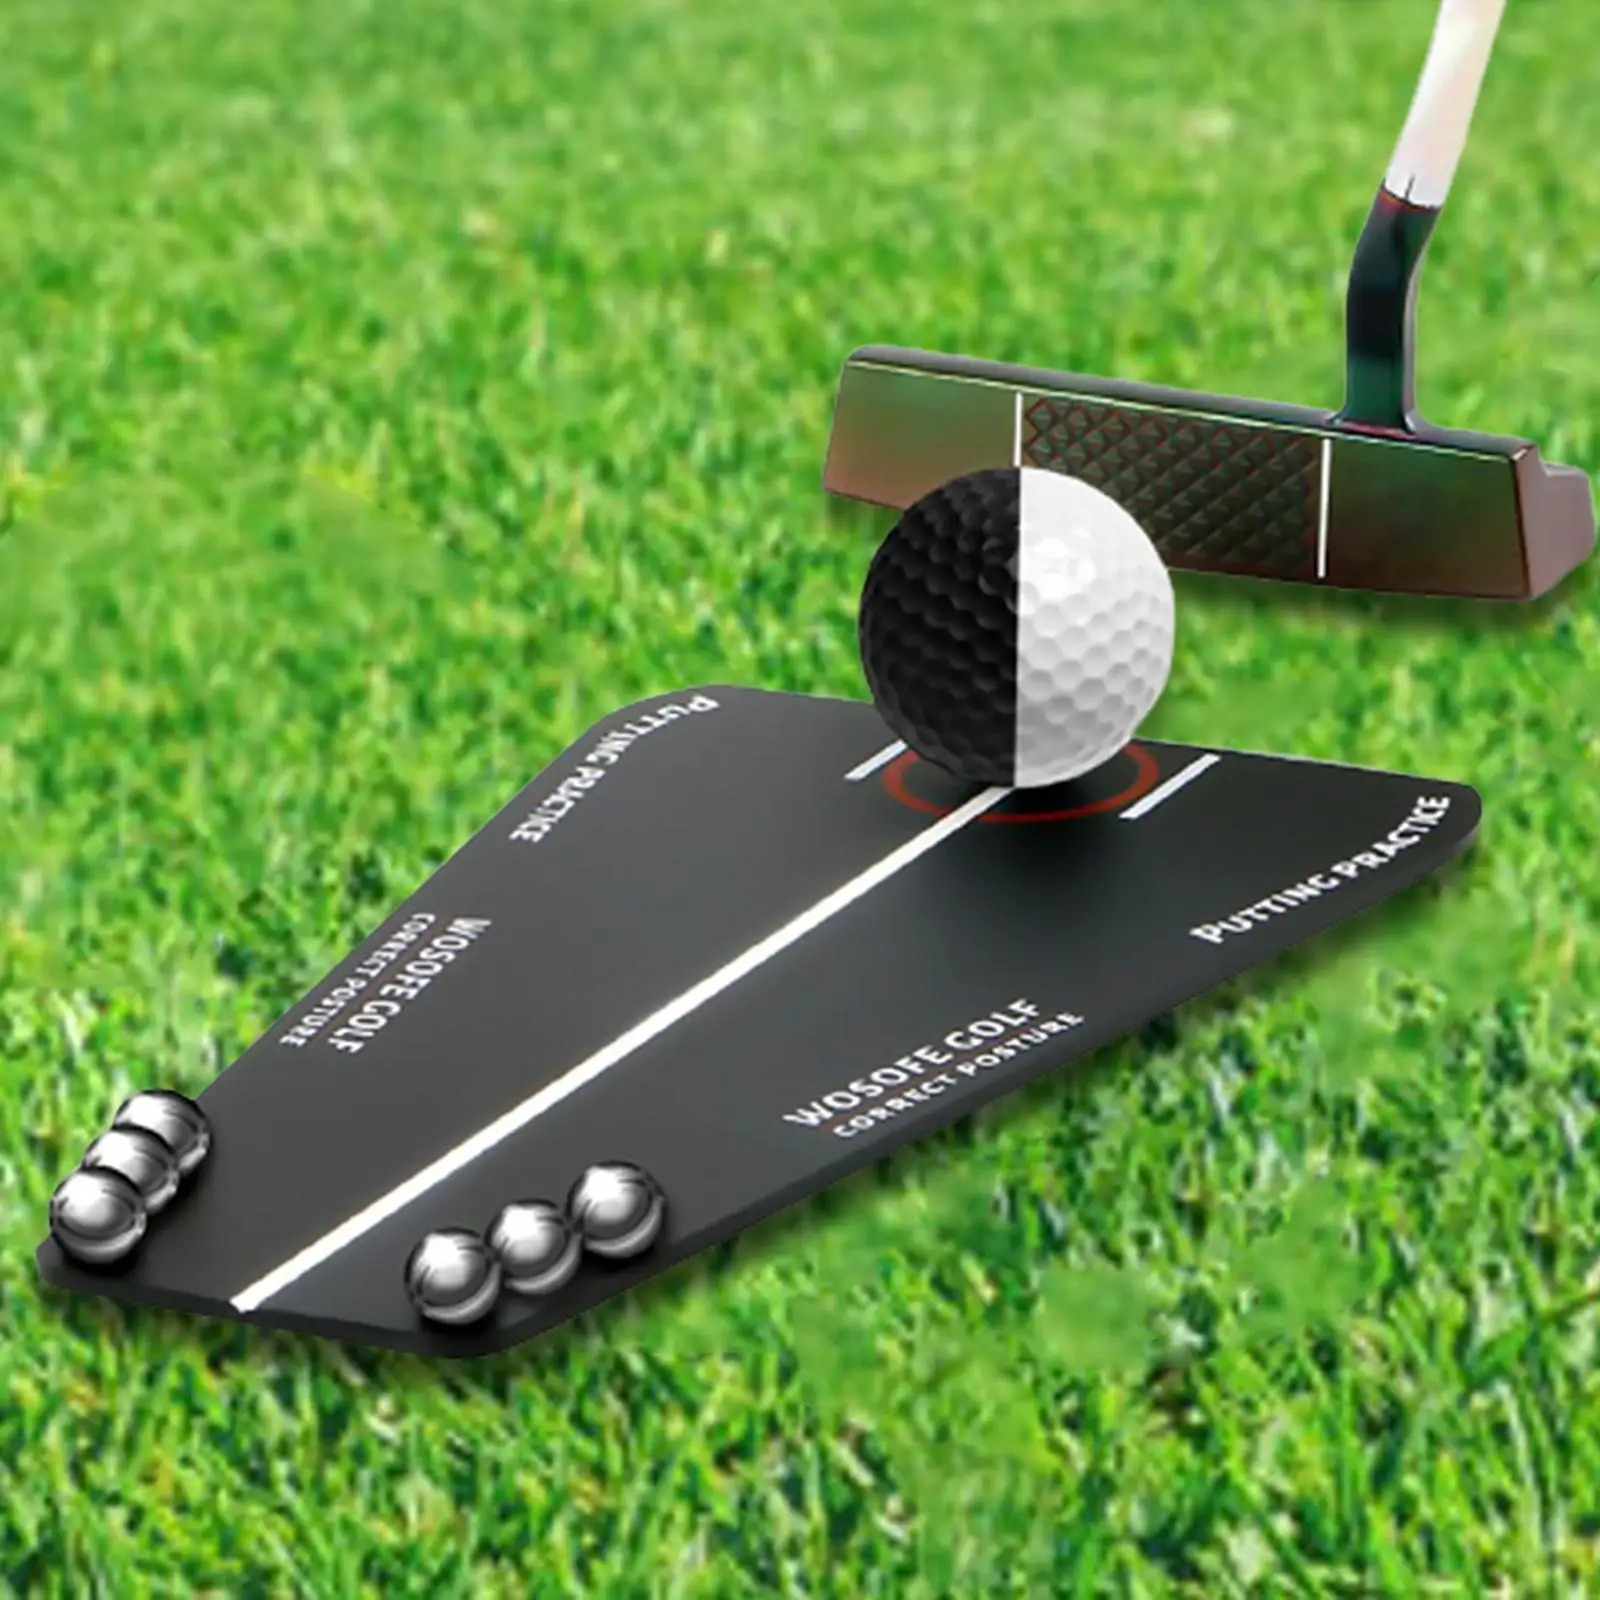 Golf Putting Aid Swing Trainer Putting Alignment Durable Golf Putting